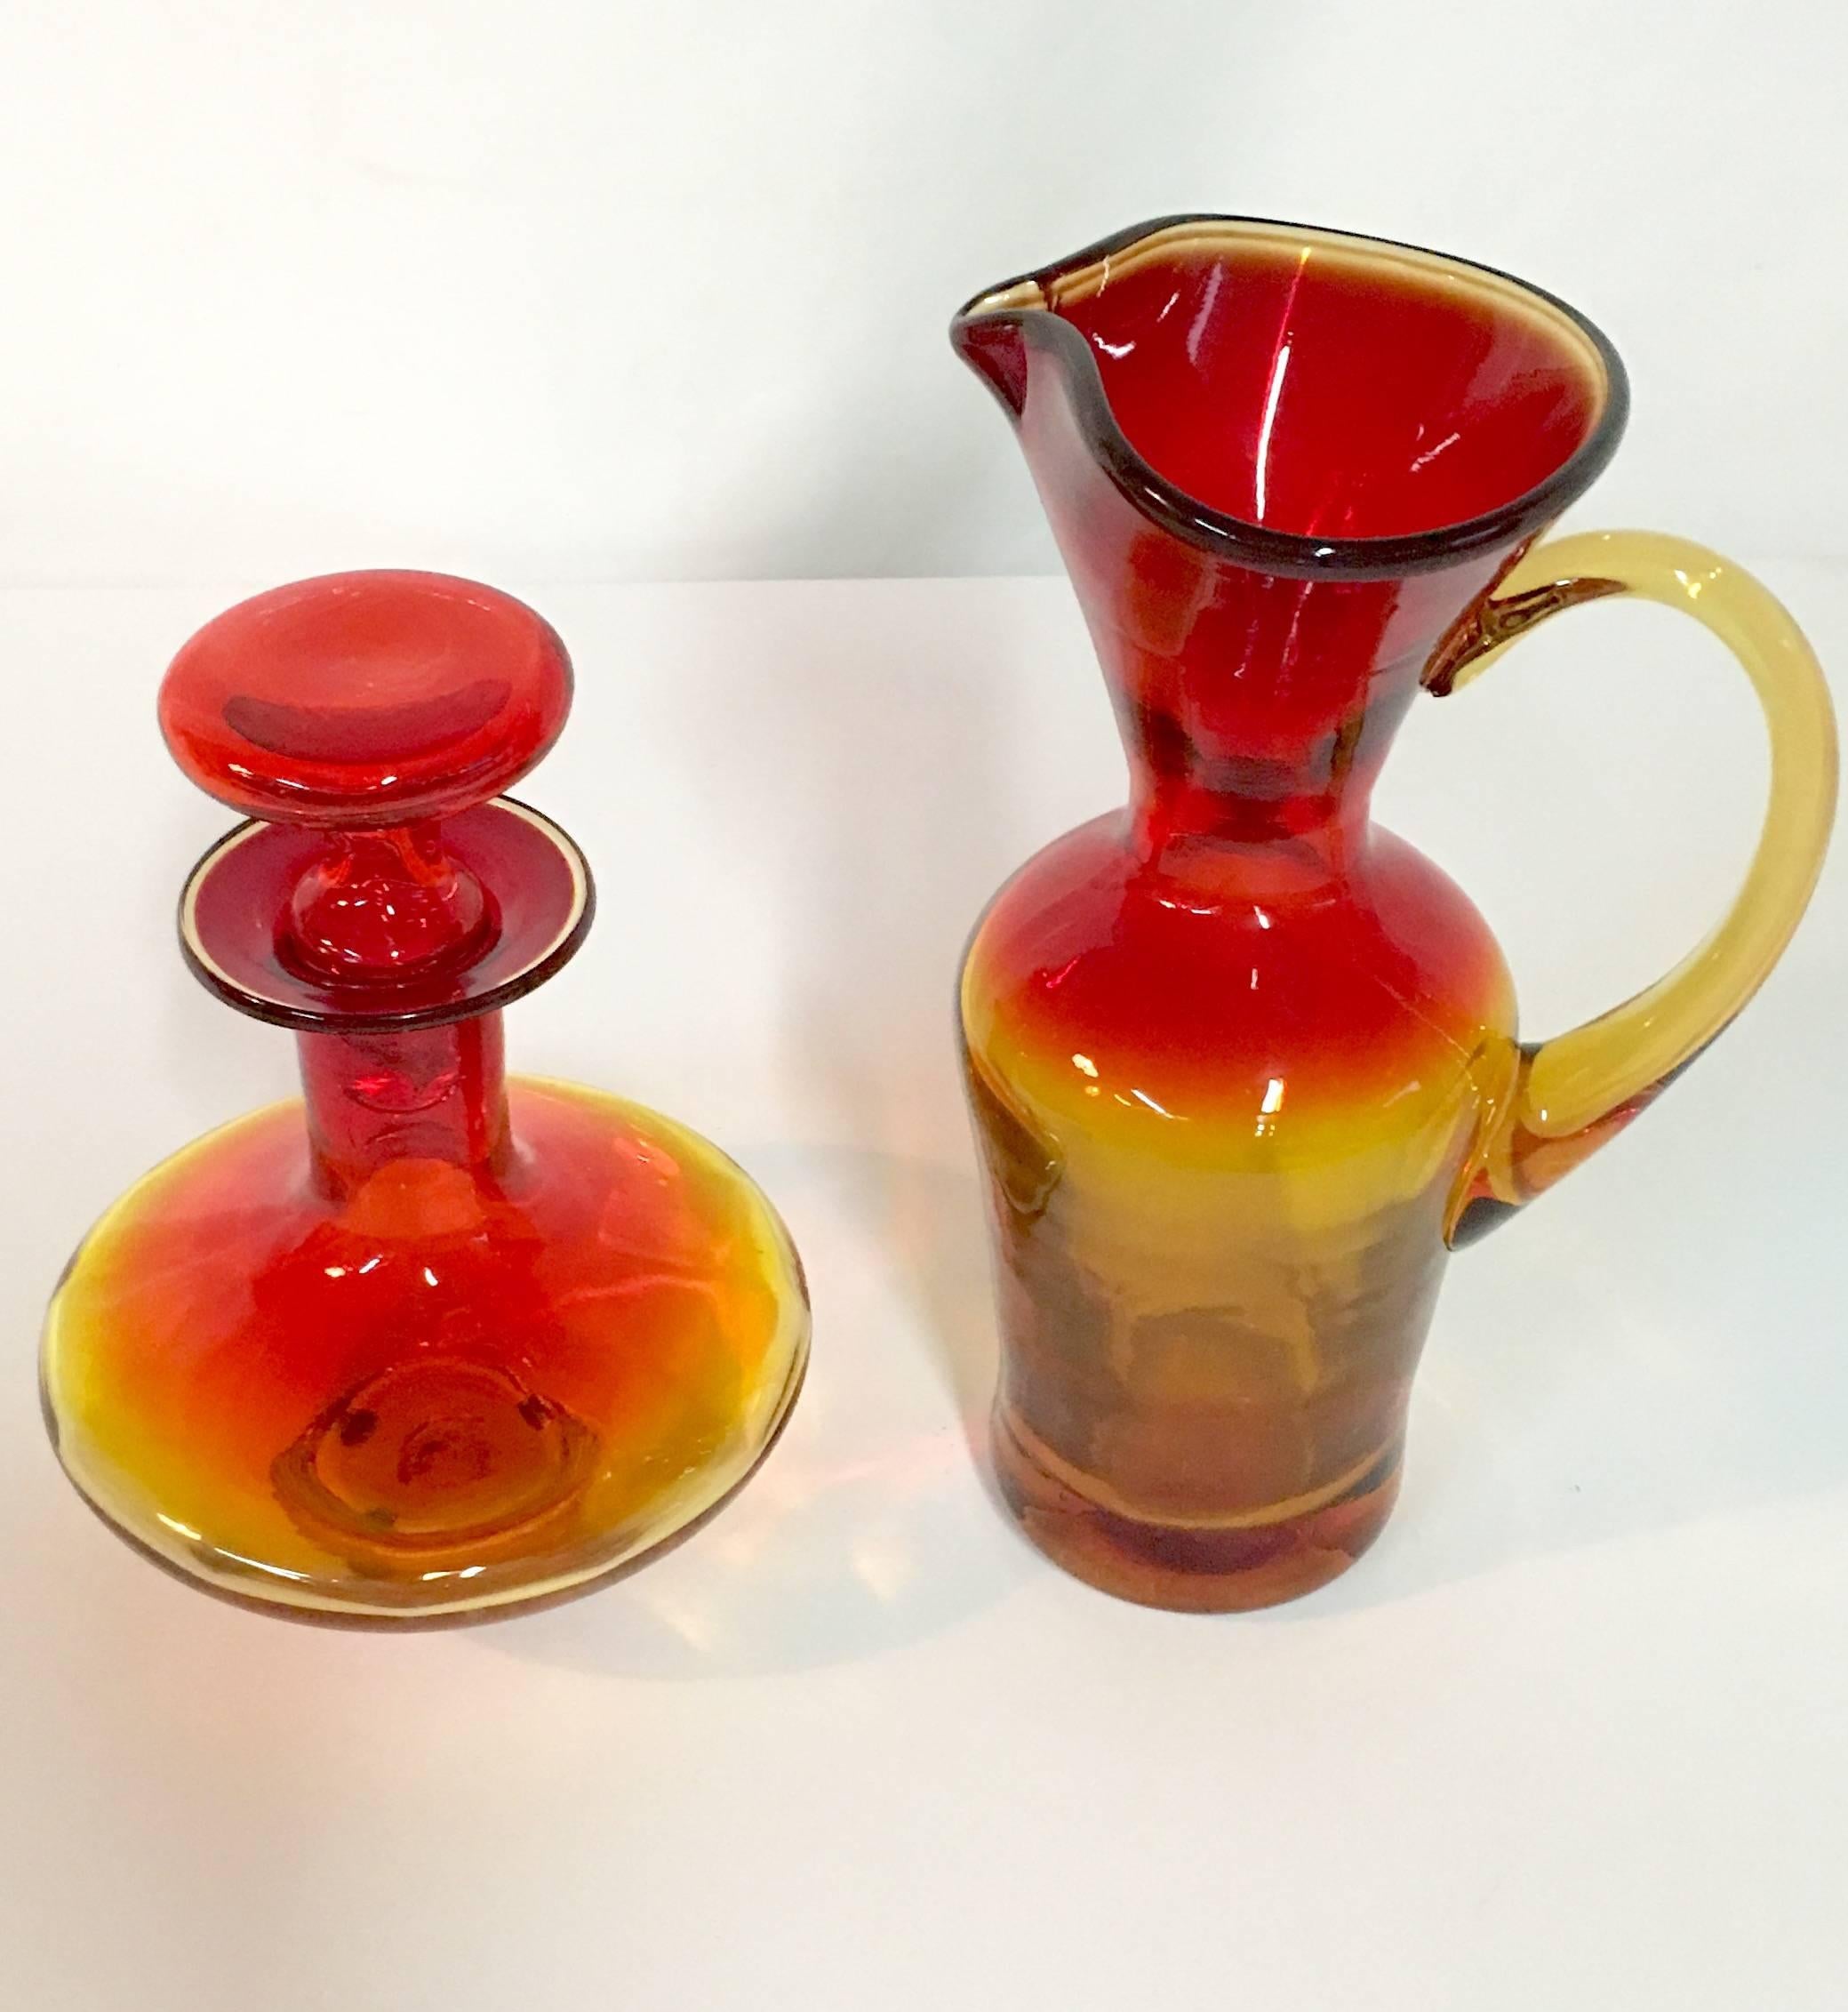 1950'S Blenko Glass Pair Of Amberina Tangerine handled pitcher & decanter with stopper. The pitcher has a hand applied handle with spout. The decanter is 